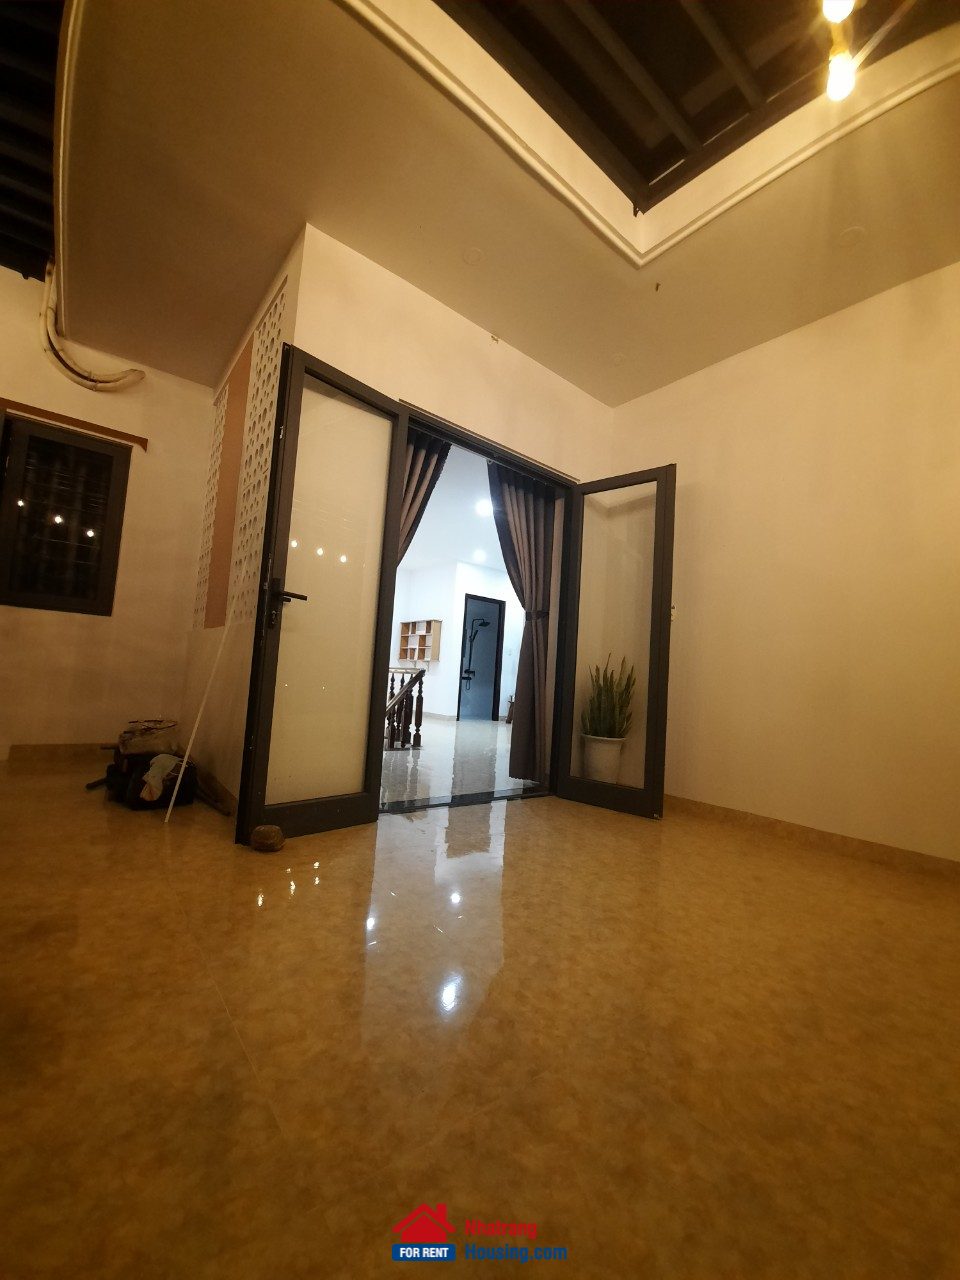 House for rent in Nha Trang. The house is located on Co Tien mountain, seaview and cityview